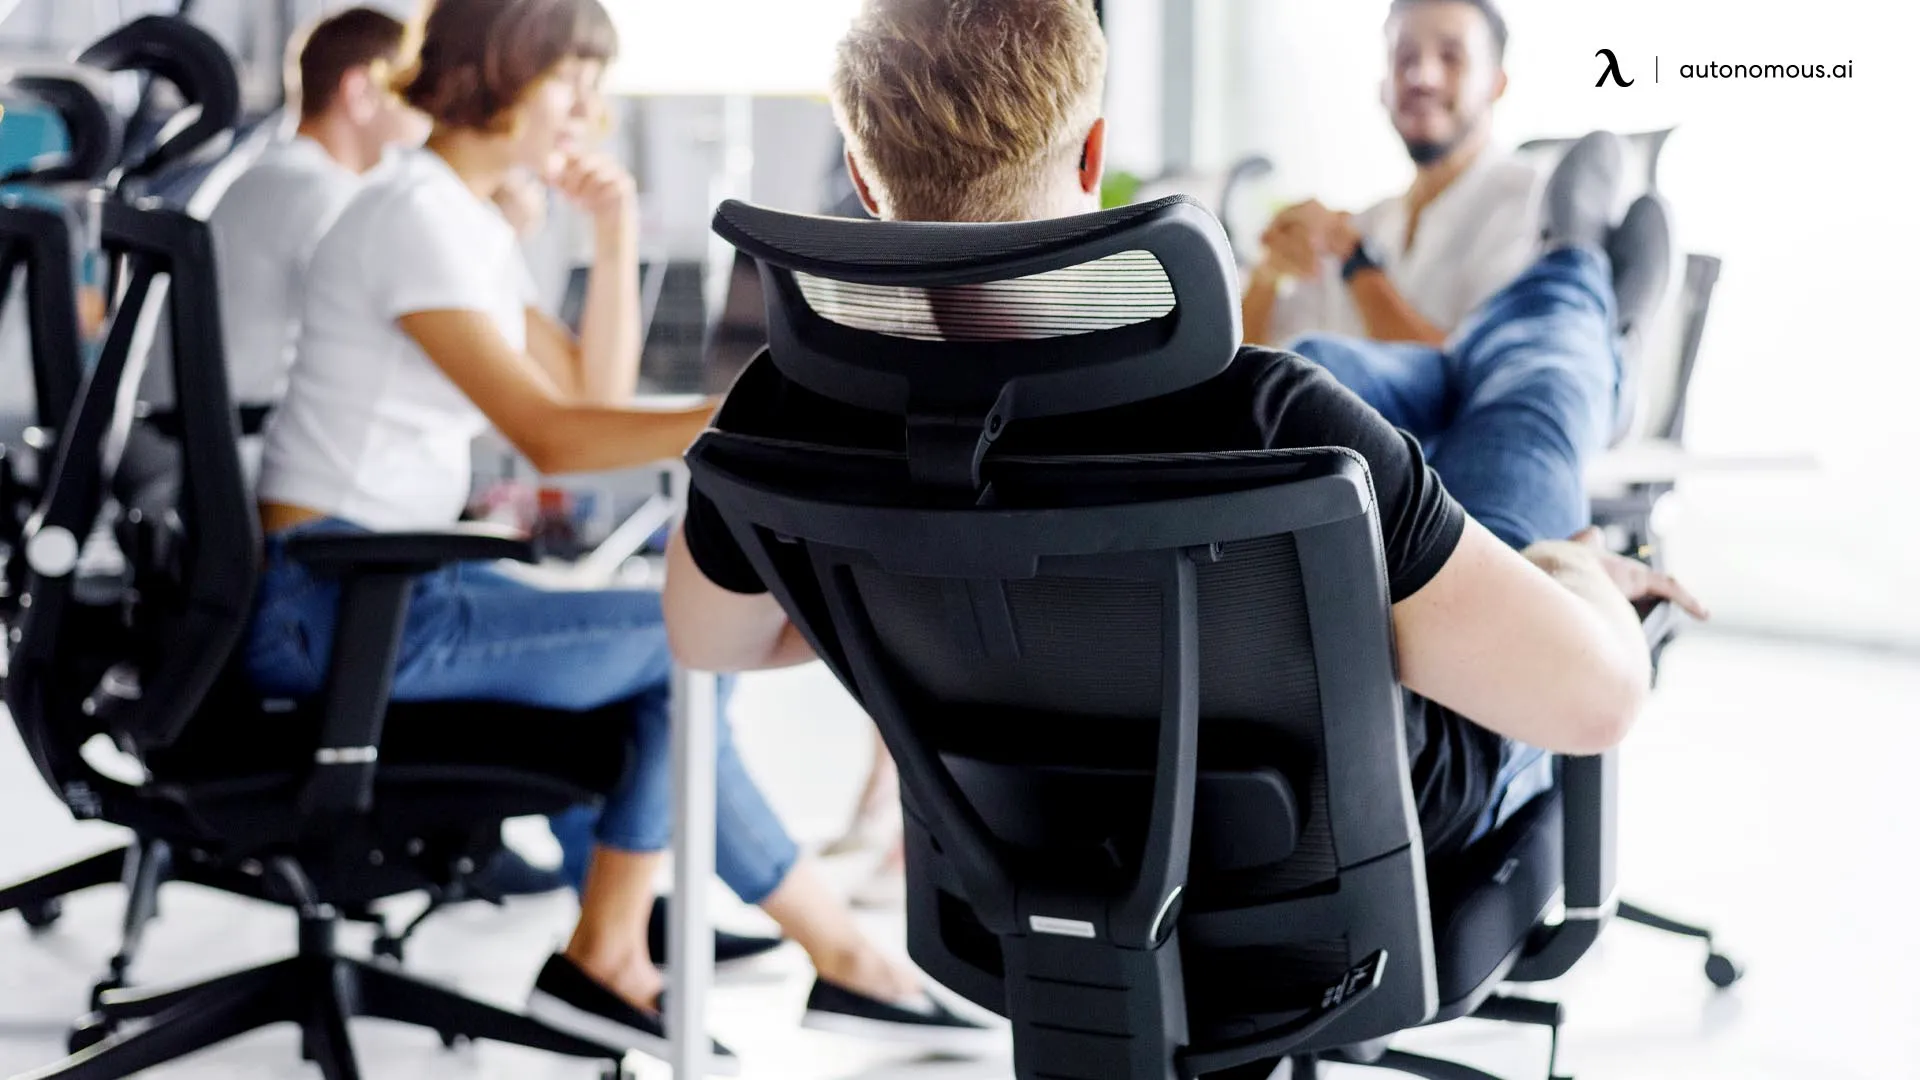 How to Test the Ergonomic Back for the Chair?